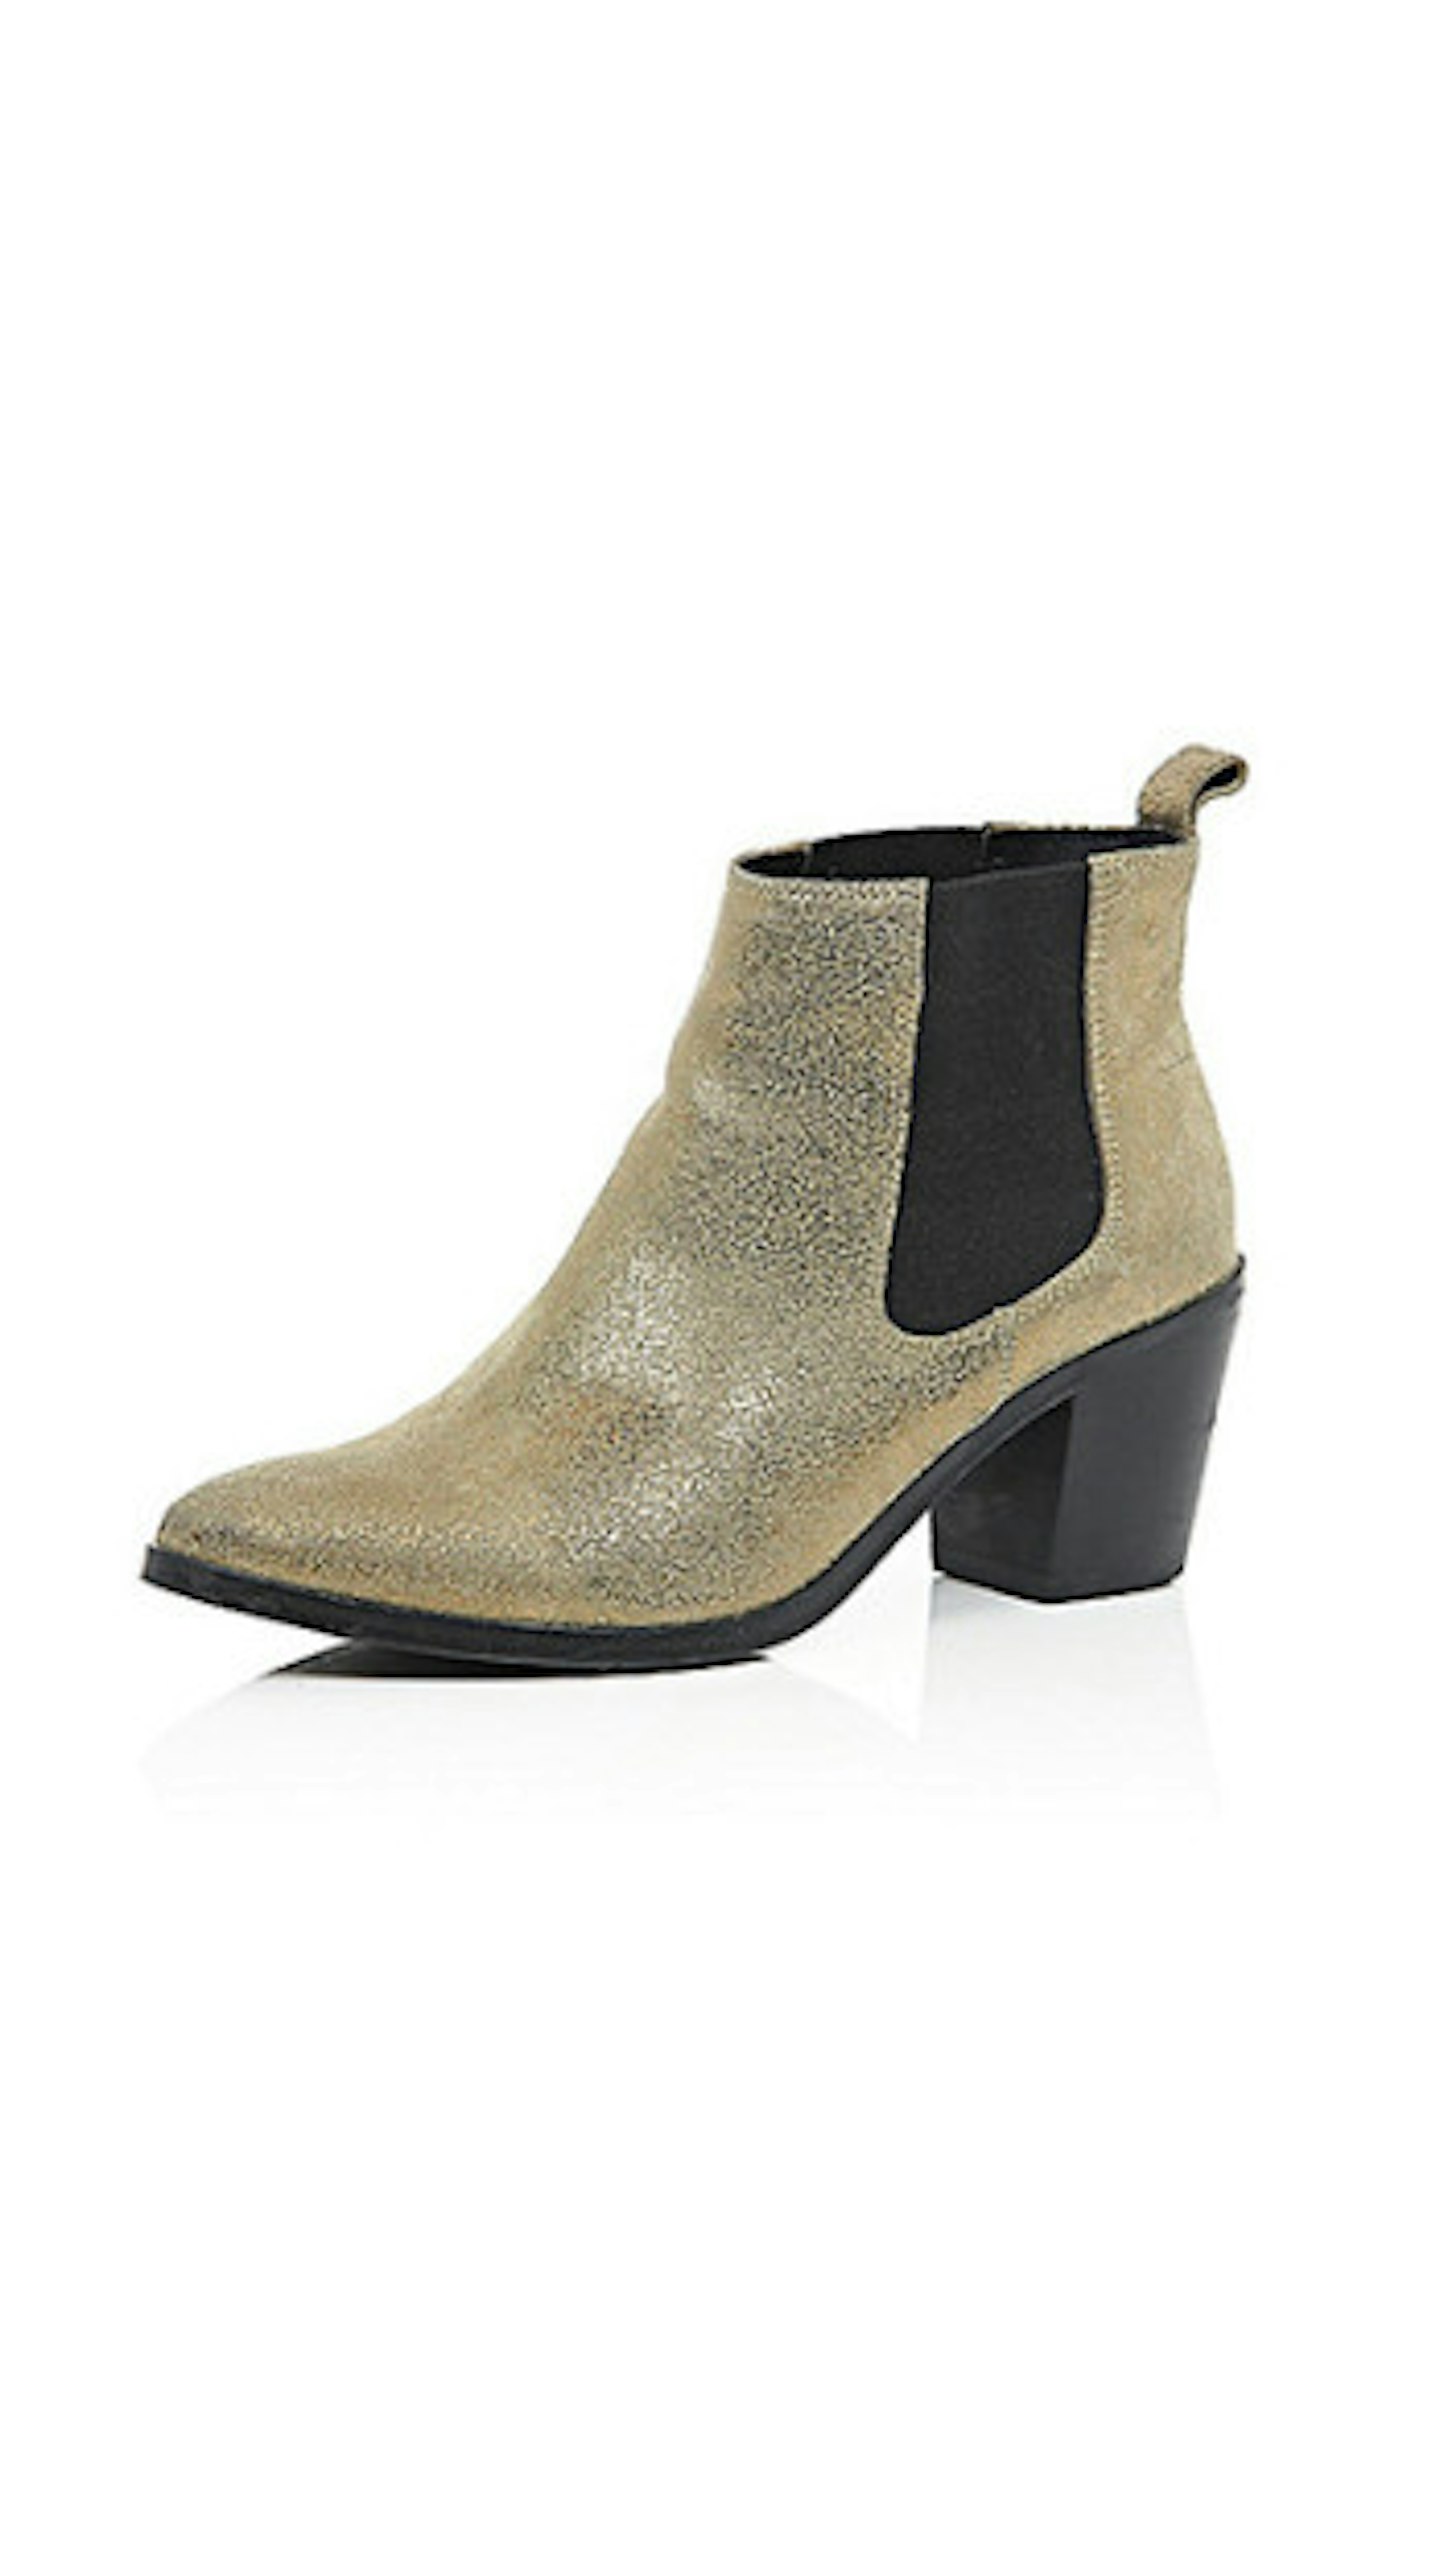 Gold leather mid heel Chelsea boots, £45